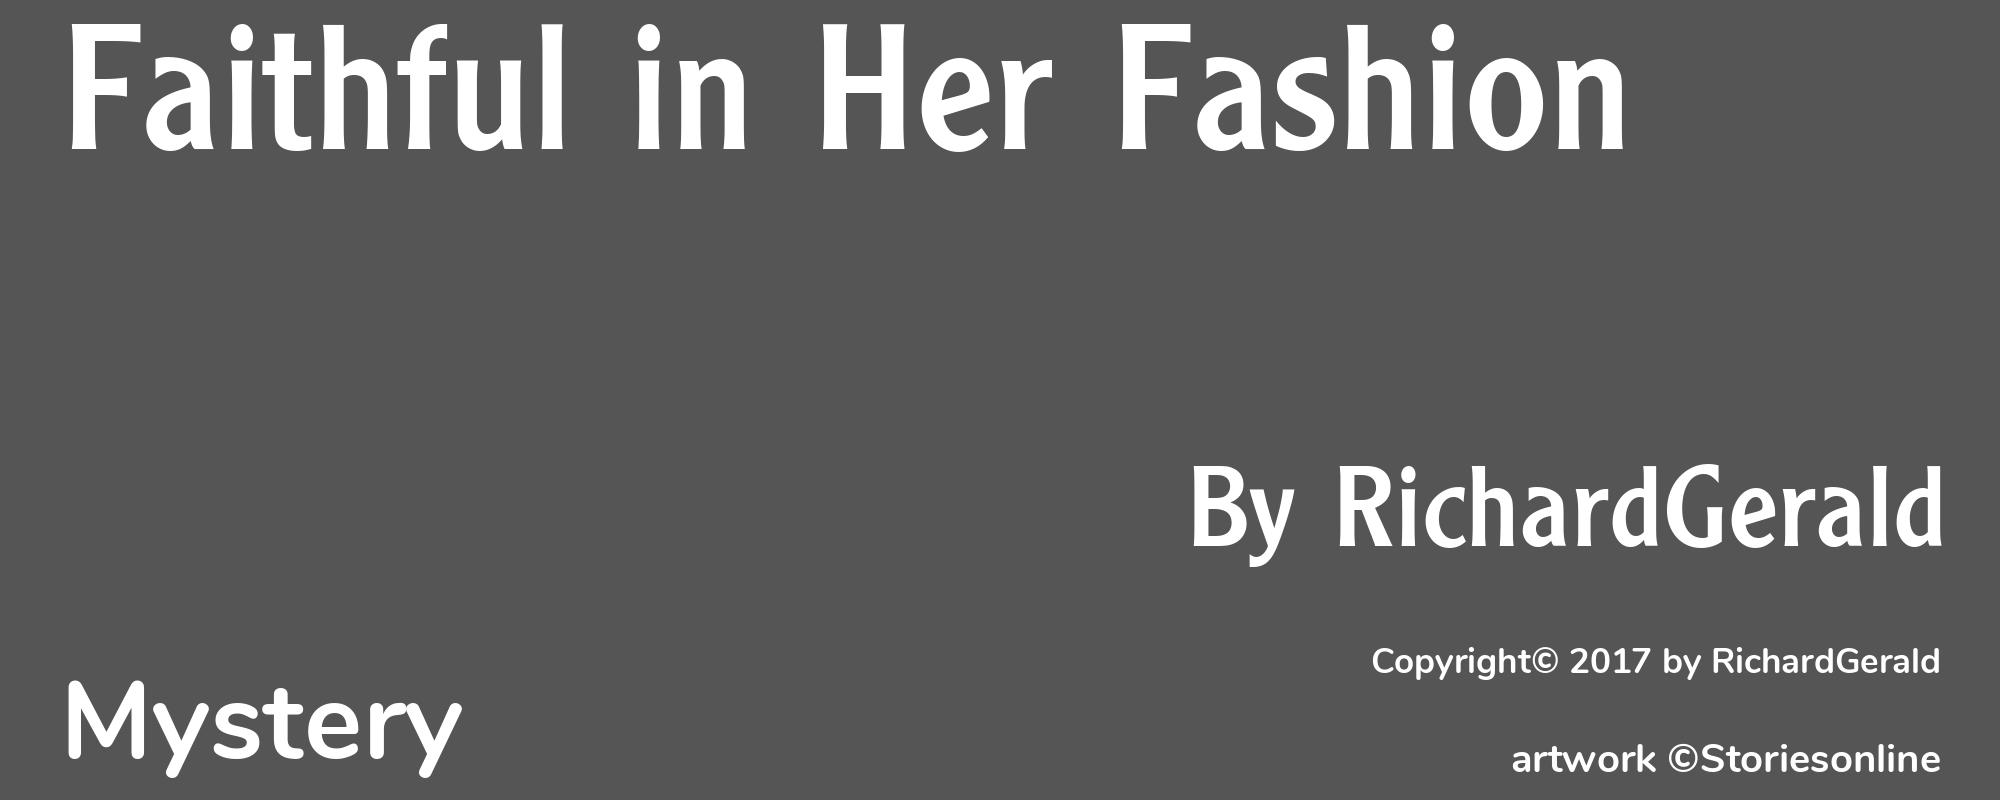 Faithful in Her Fashion - Cover